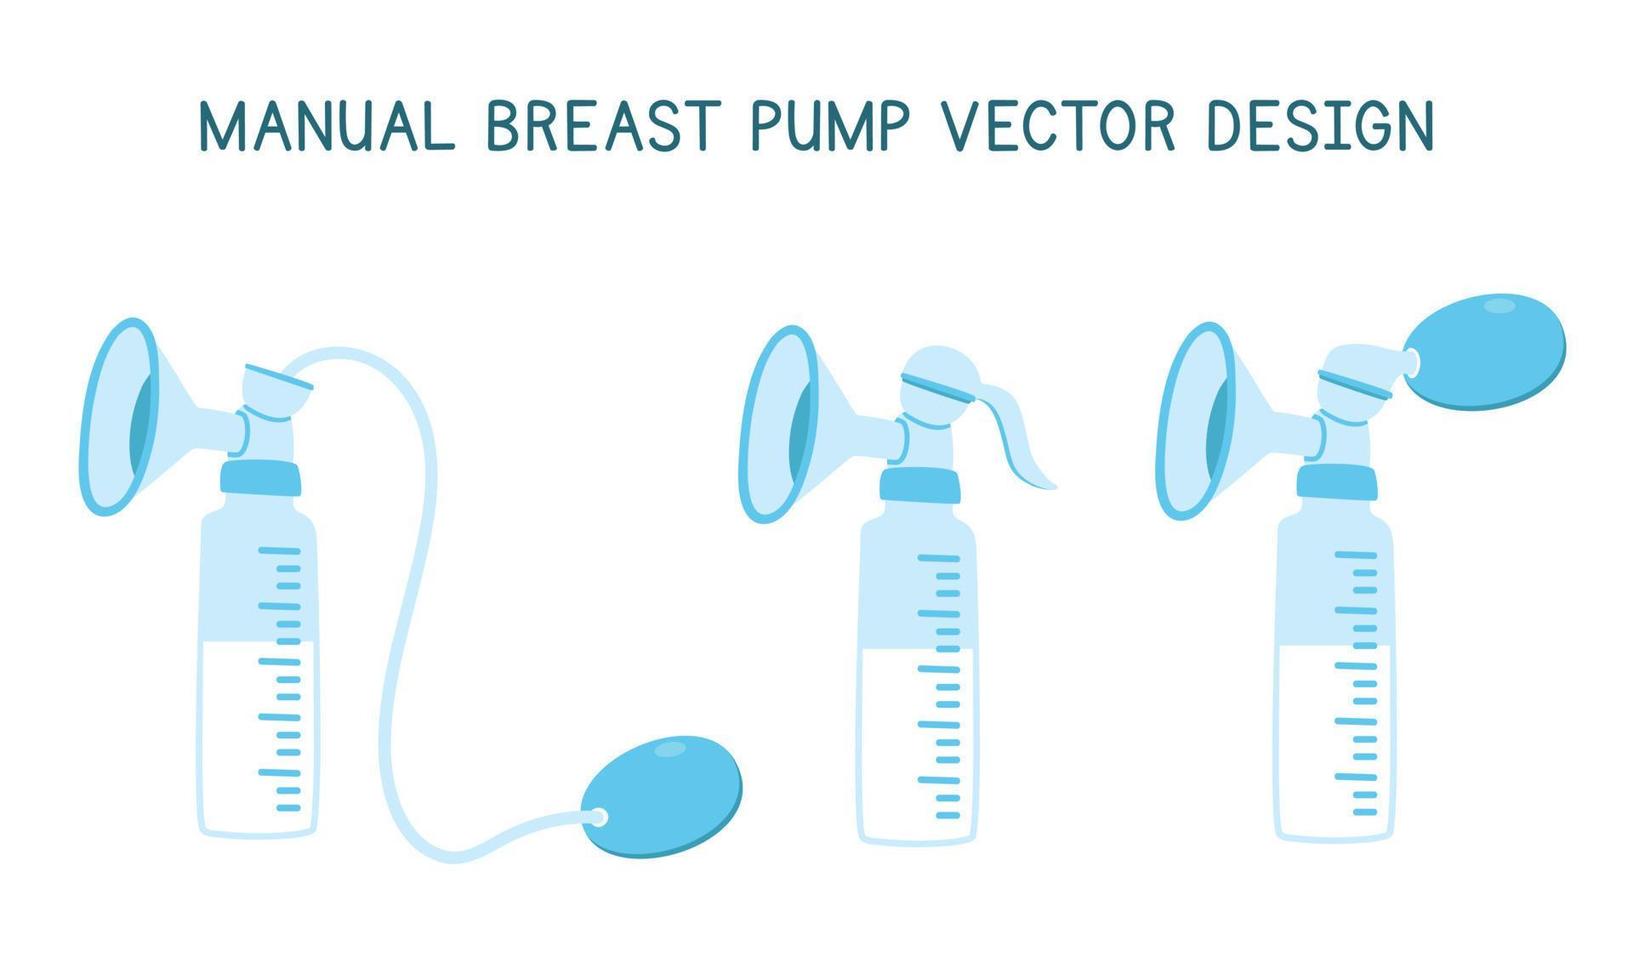 Vector set of breast pump clipart. Simple cute manual breast pump with breast milk flat vector illustration isolated on white background. Equipment for breastfeeding mother and baby cartoon style